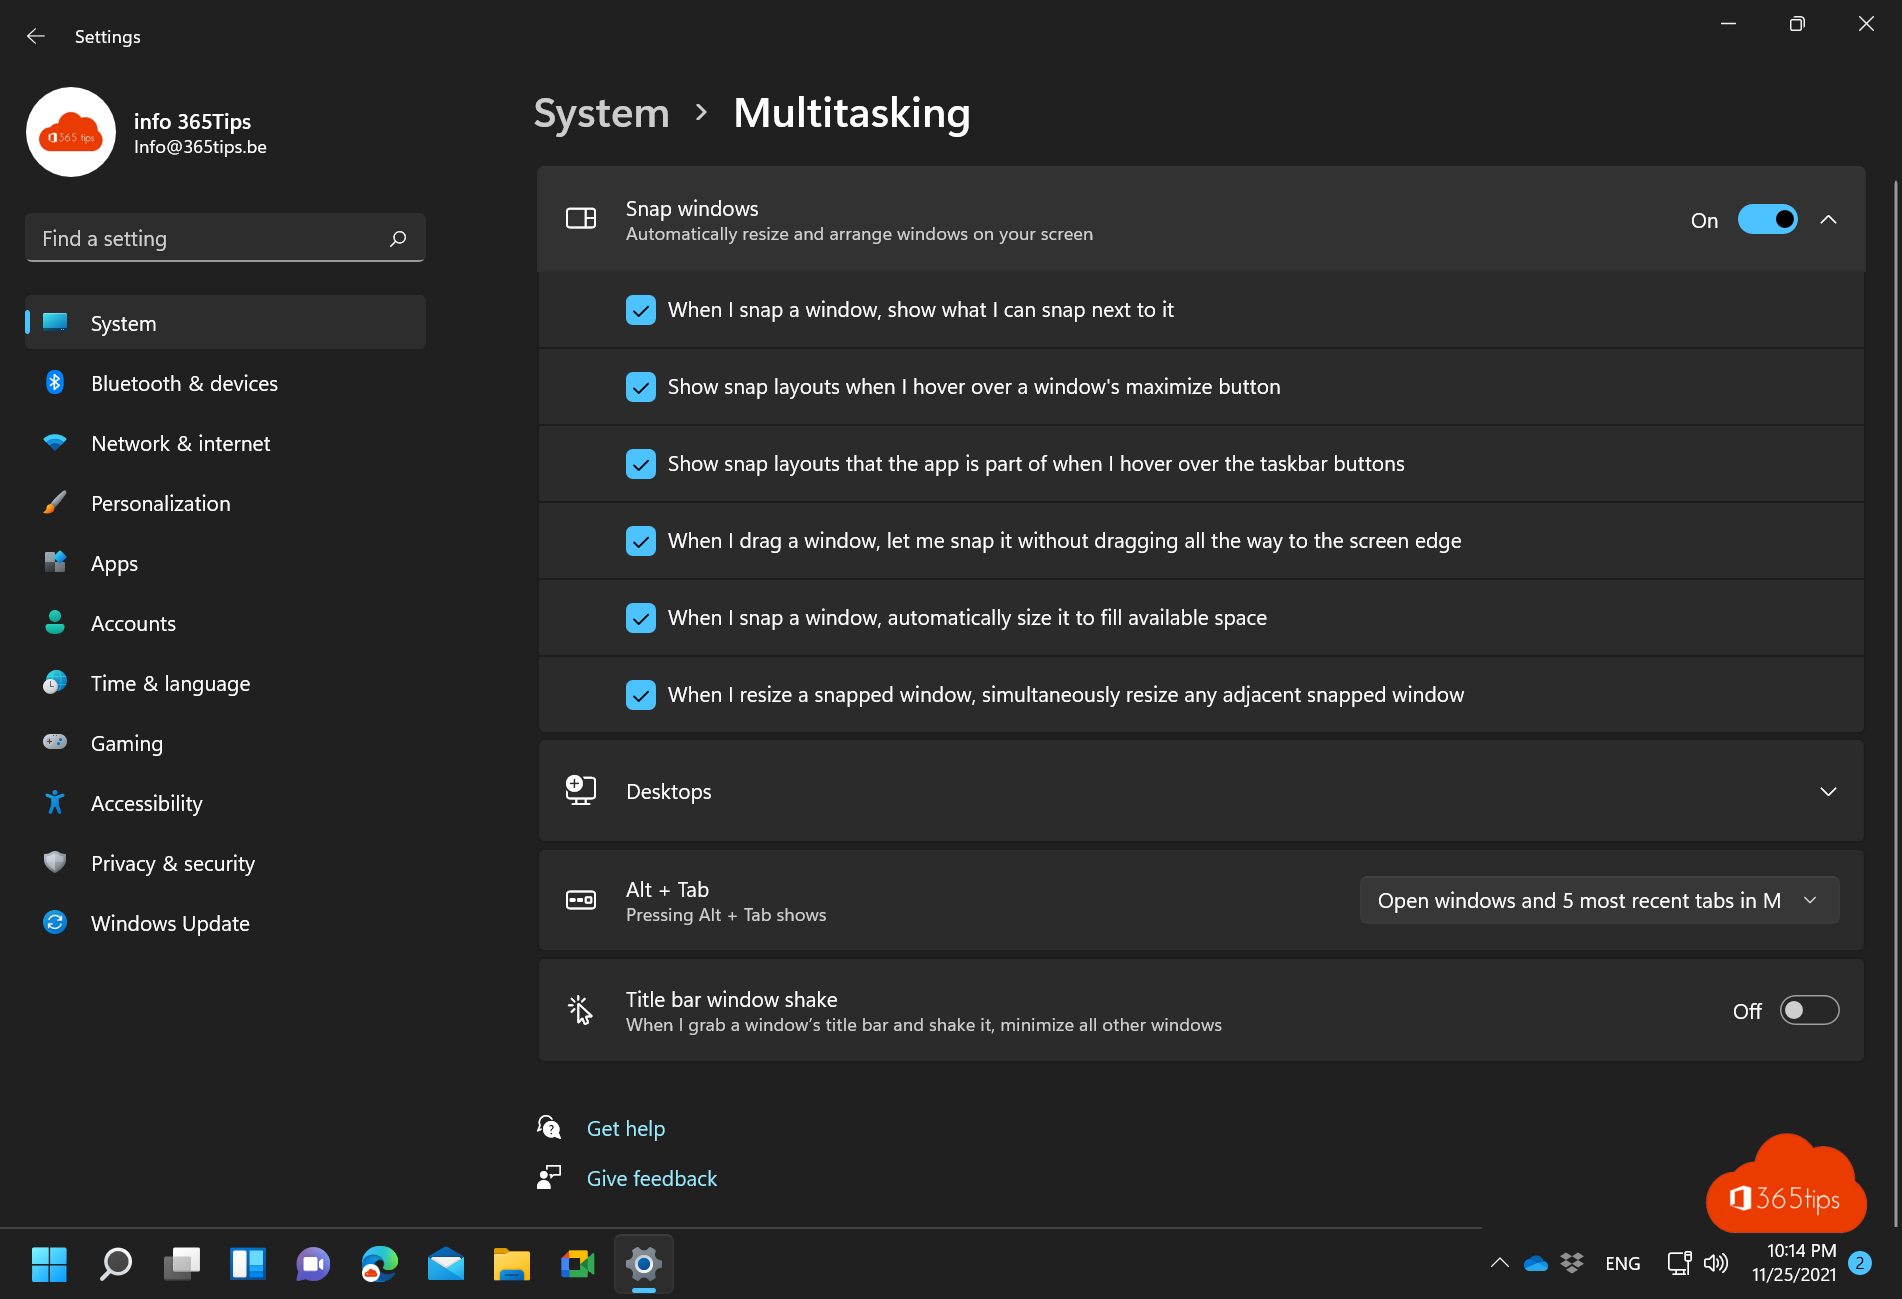 How can you juxtapose applications in Windows 11 to multitask better?